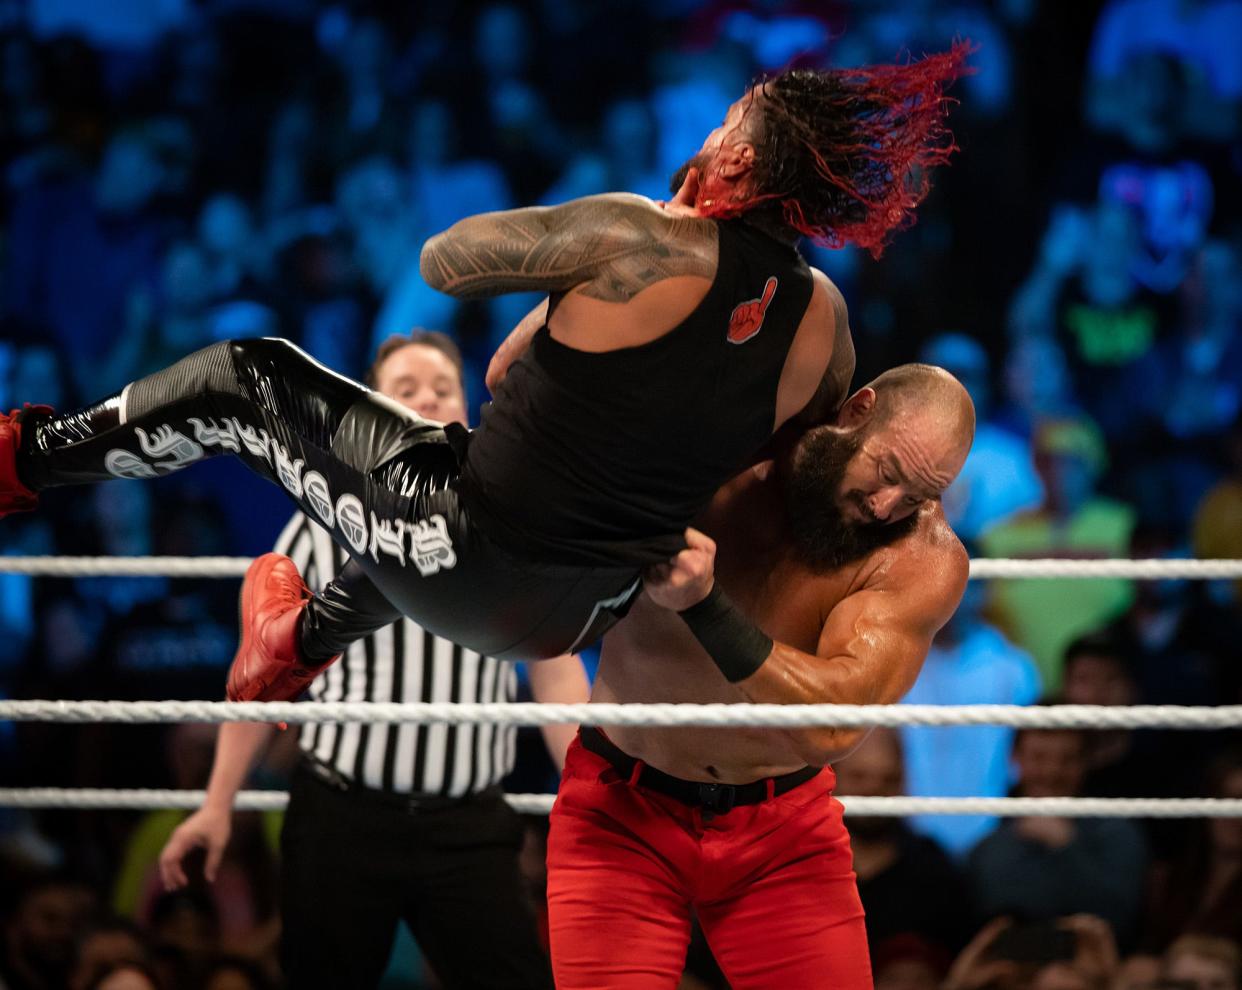 WWE star Braun Strowman delivers a chokeslam to Jimmy Uso during "WWE Friday Night SmackDown" on Oct. 7 at the DCU Center in Worcester, Mass.